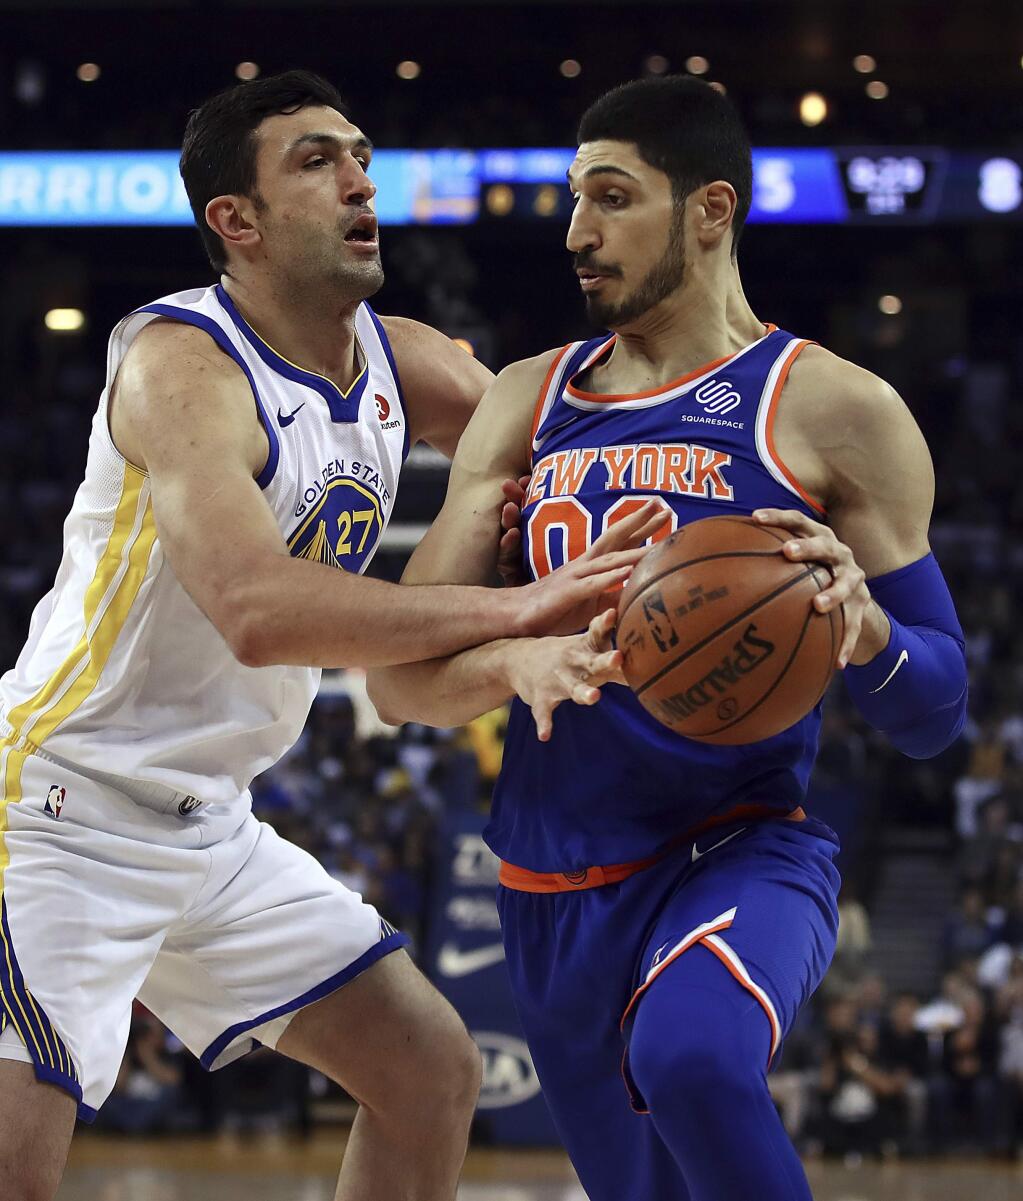 New York Knicks center Enes Kanter, right, drives the ball against Golden State Warriors center Zaza Pachulia during the first half Tuesday, Jan. 23, 2018, in Oakland. (AP Photo/Ben Margot)